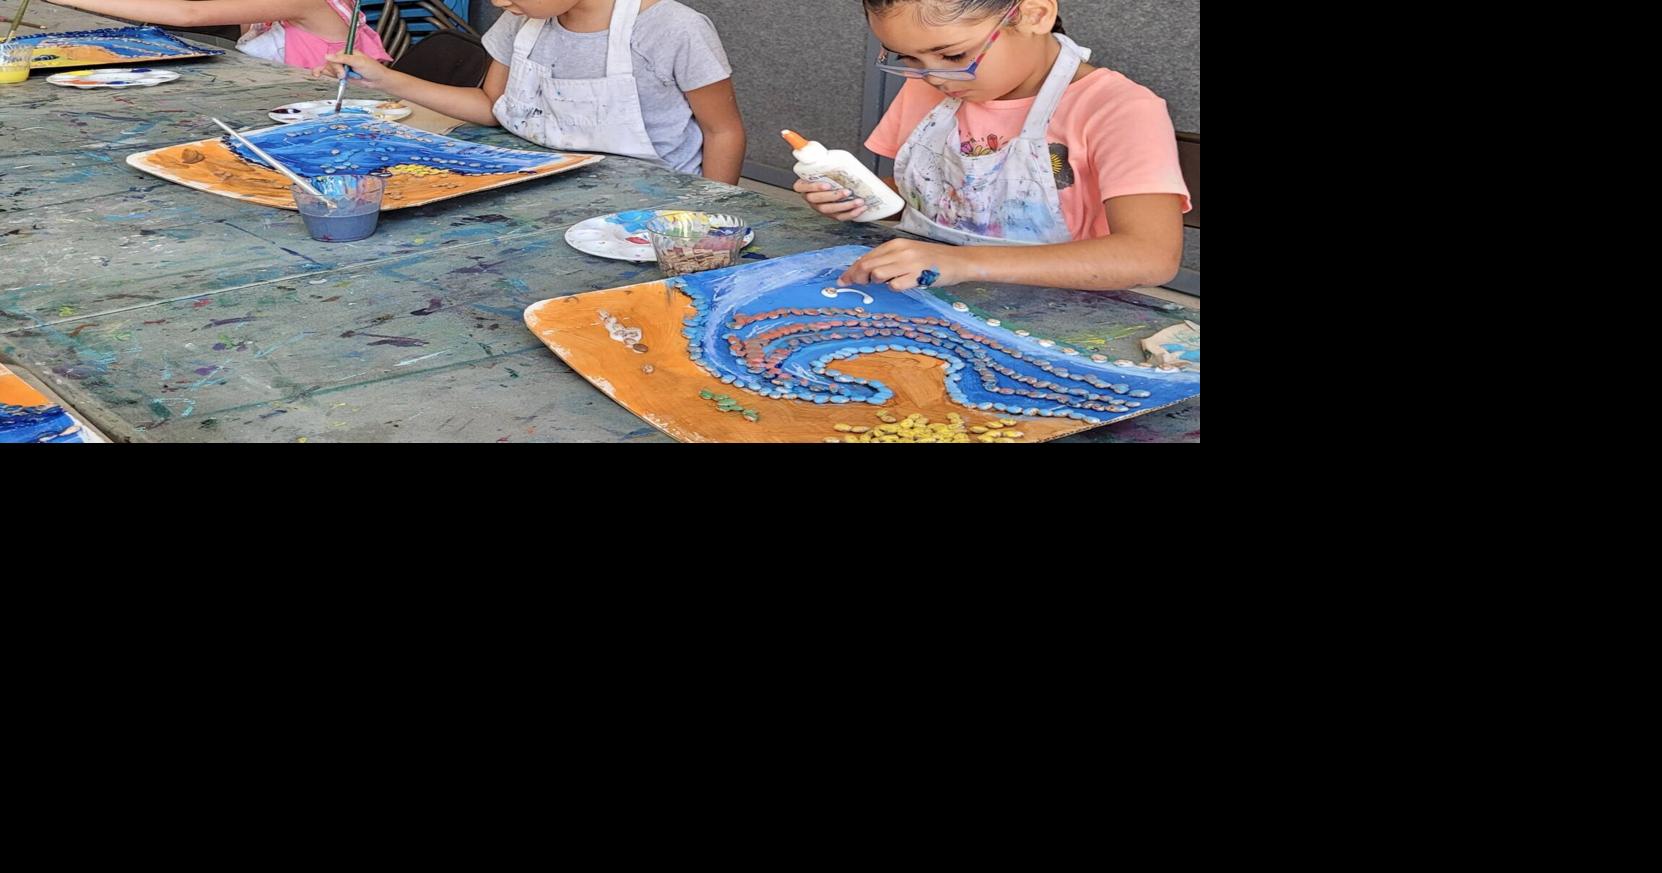 The Kings Art Center summer camp is back, this year it's taking art